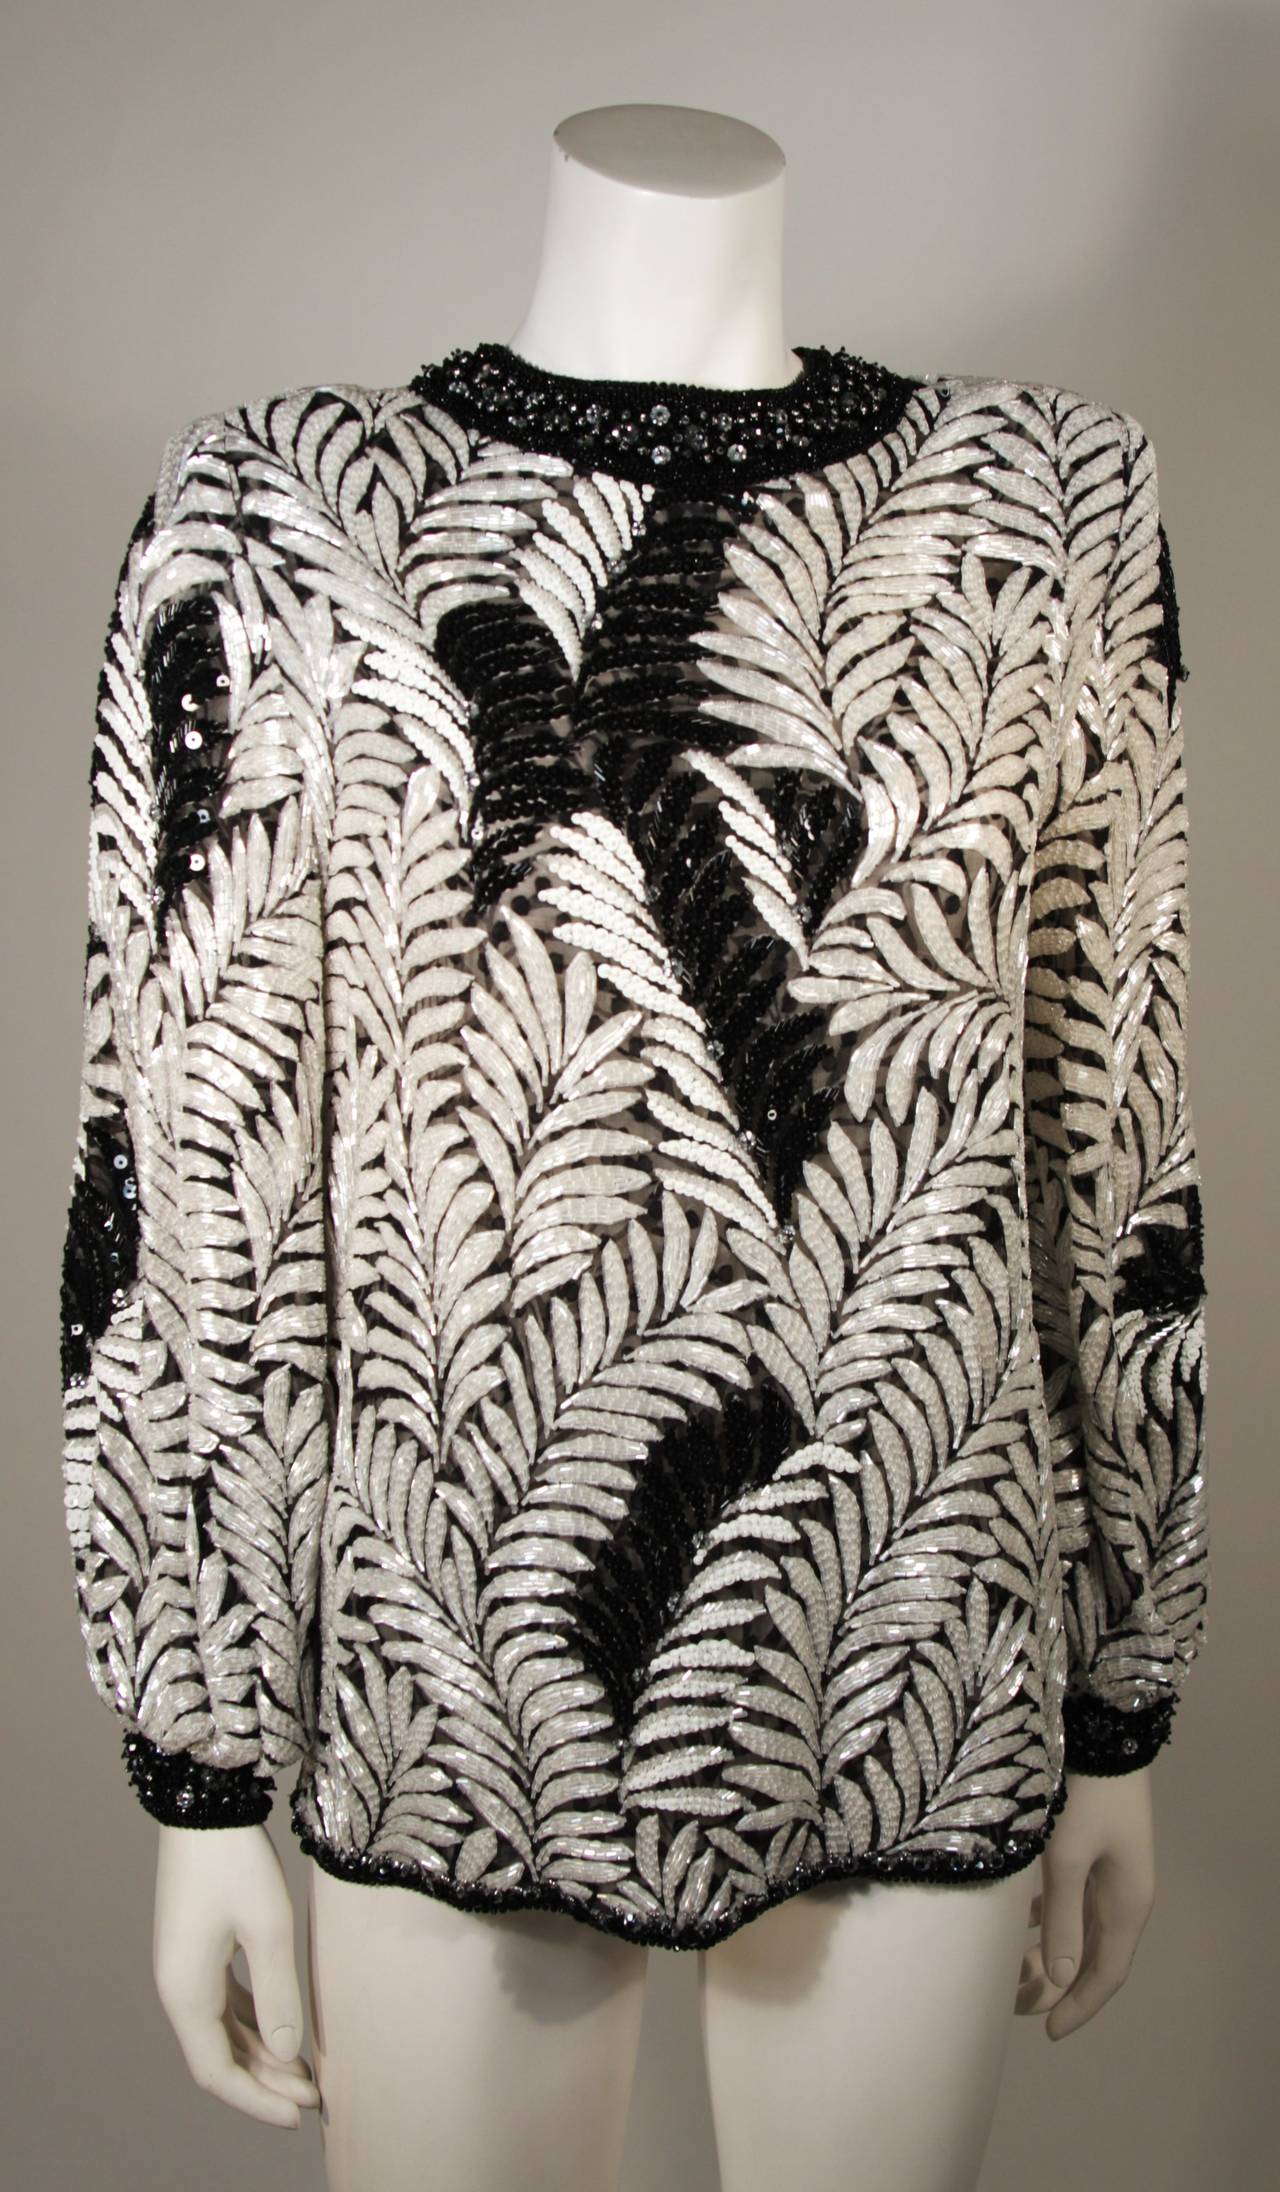 This Galanos blouse is available for viewing at our Beverly Hills Boutique. The top is composed of a wonderfully embellished Palm motif fabric. The ornate embellishment is brought to life with the black and white contrasting beading. There is a